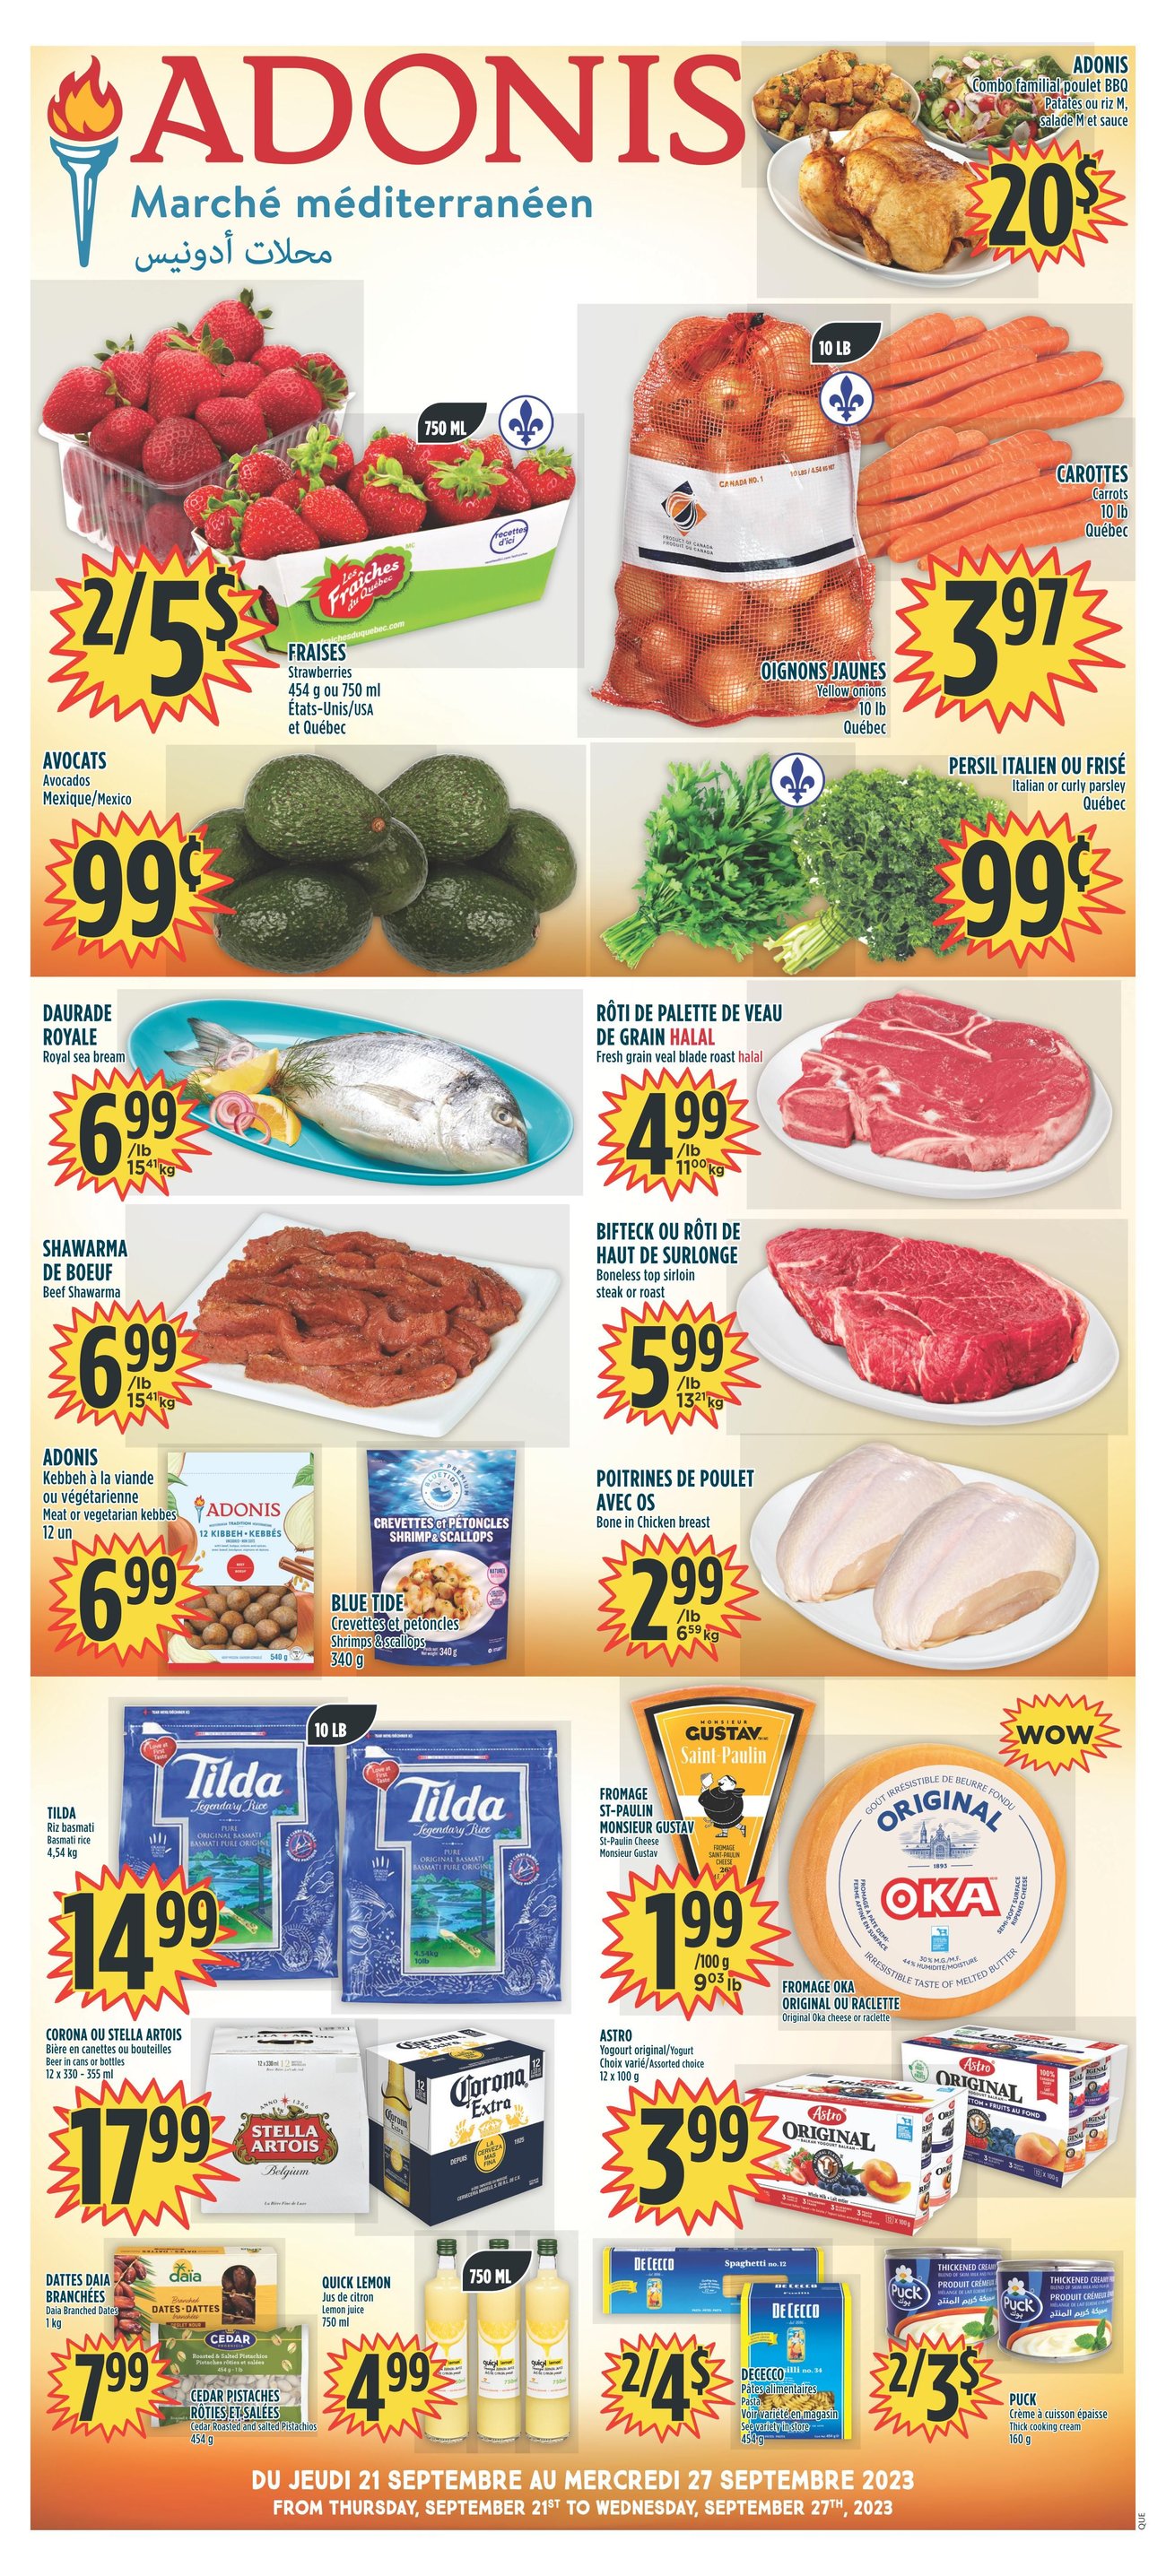 Adonis - Weekly Flyer Specials - Page 1